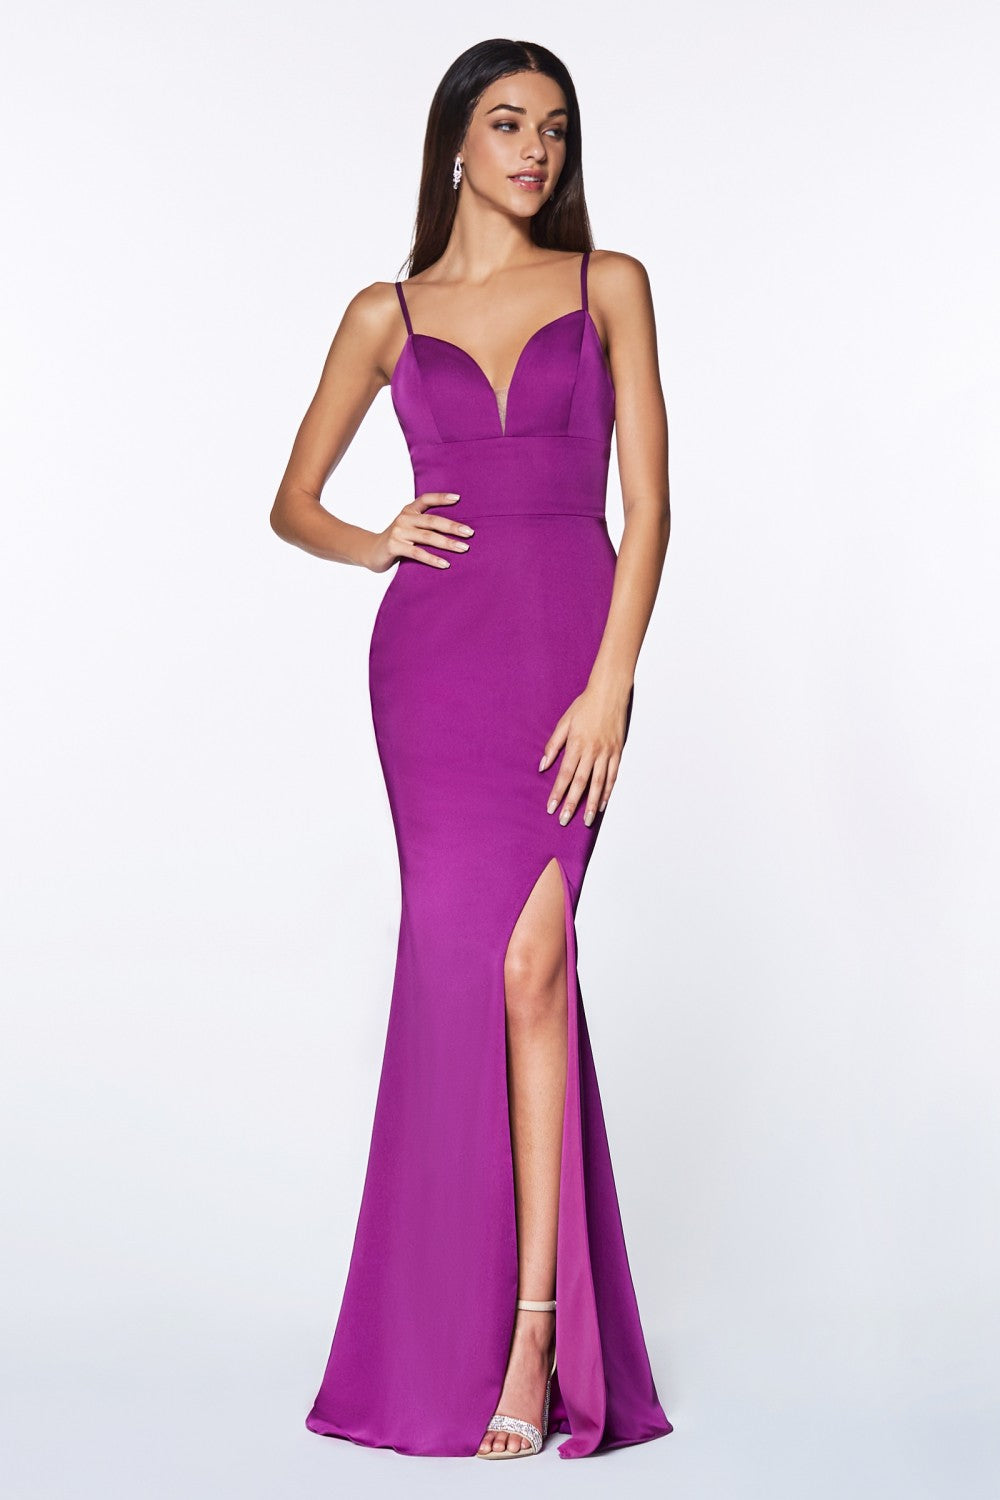 MyFashion.com - Fitted sweetheart neckline gown with leg slit and open back(7470) - Cinderella Divine promdress eveningdress fashion partydress weddingdress 
 gown homecoming promgown weddinggown 